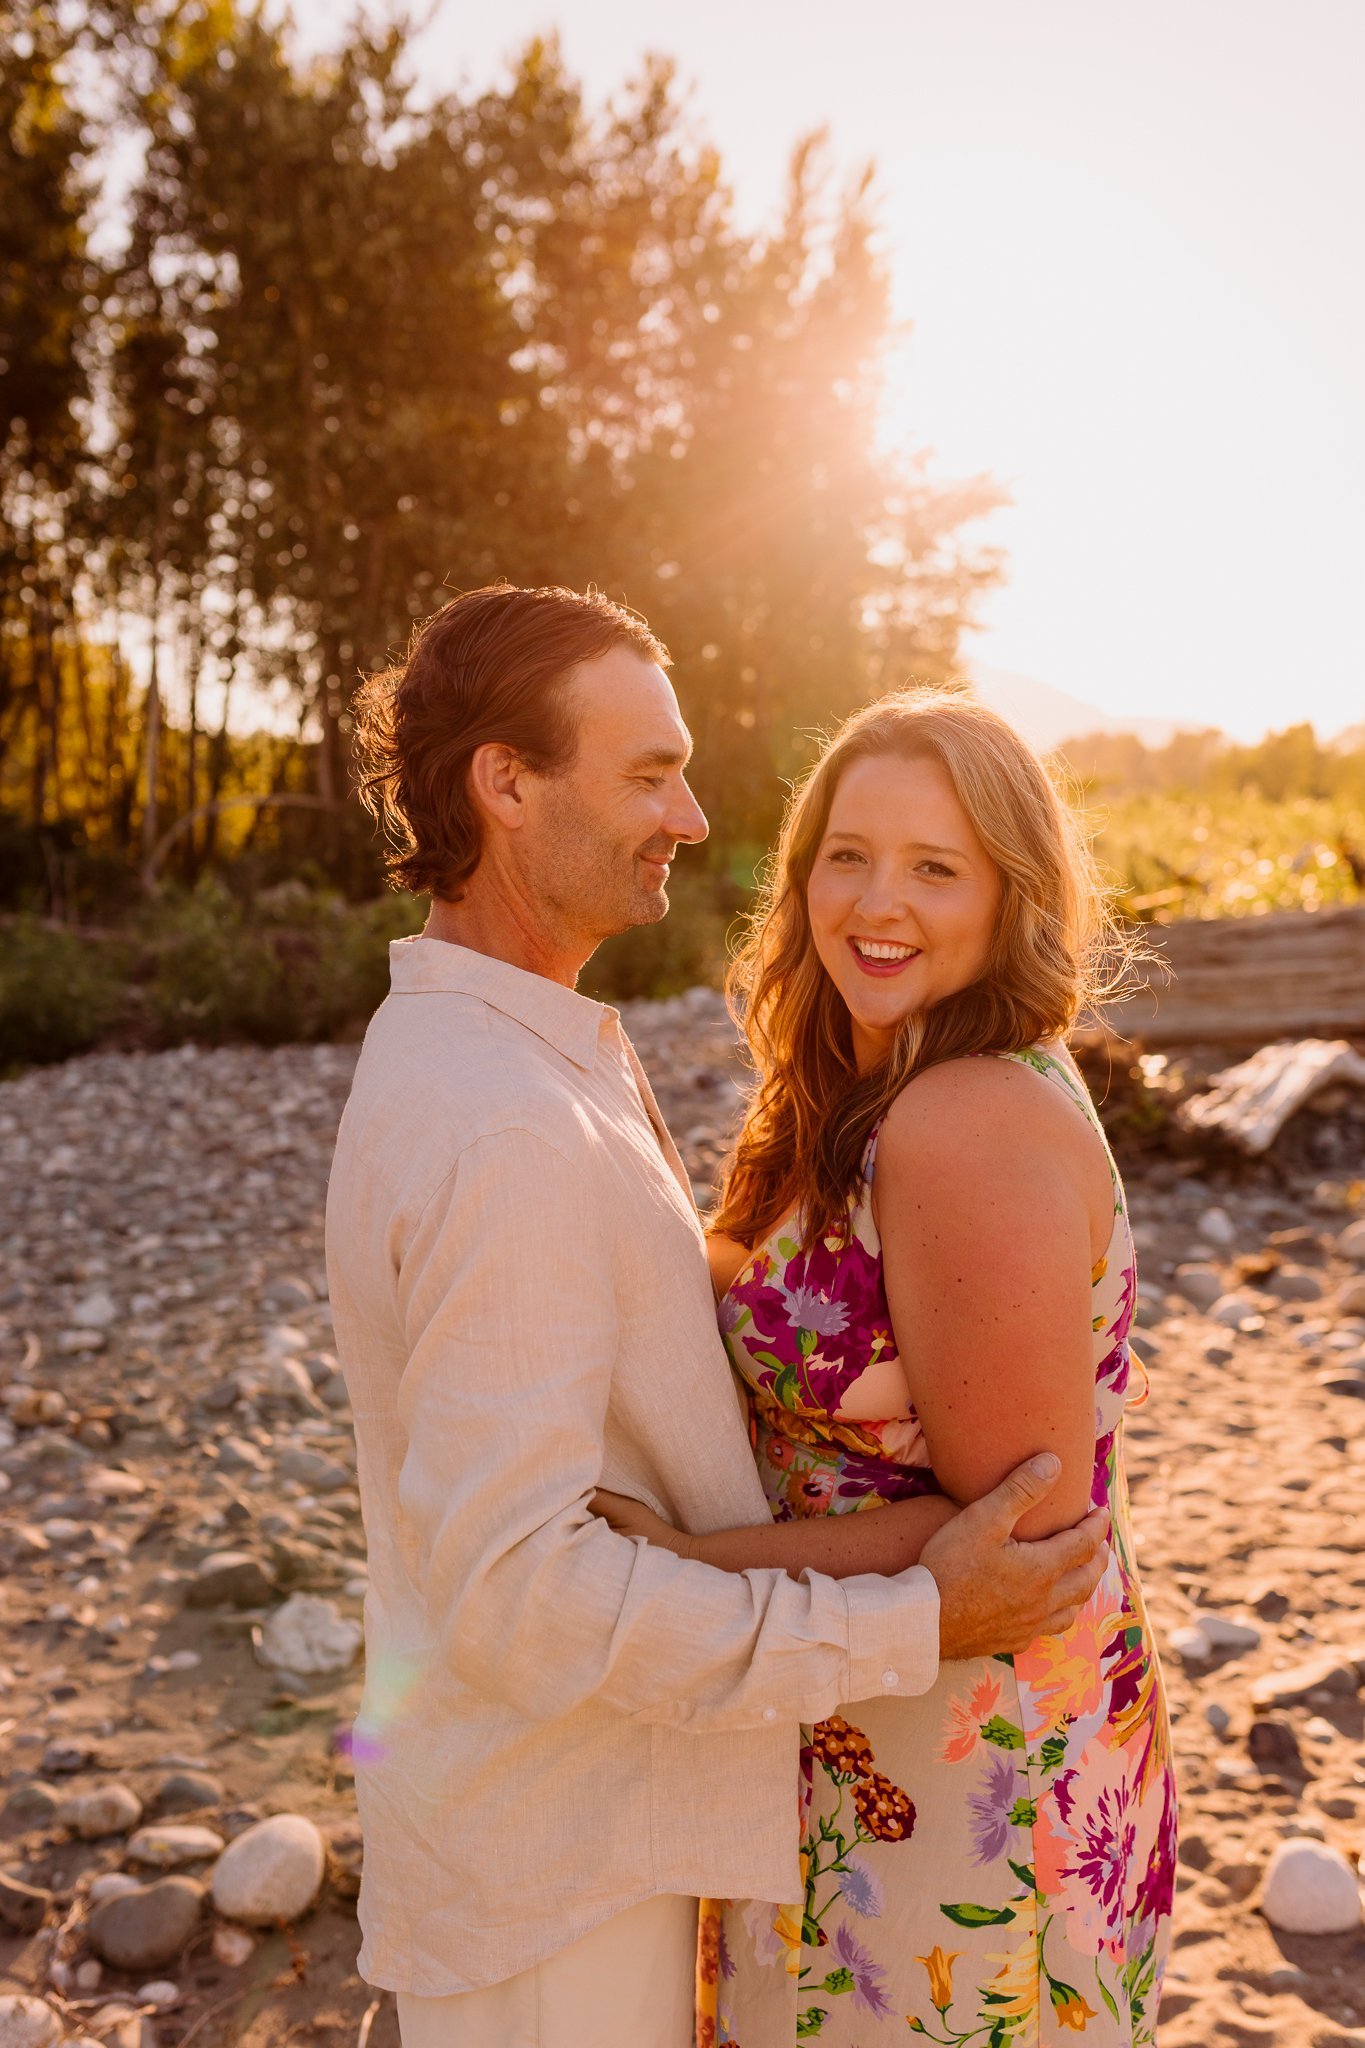 Vedder+River+Family+Session+-+Anna+Hurley+Photography++(11).jpg